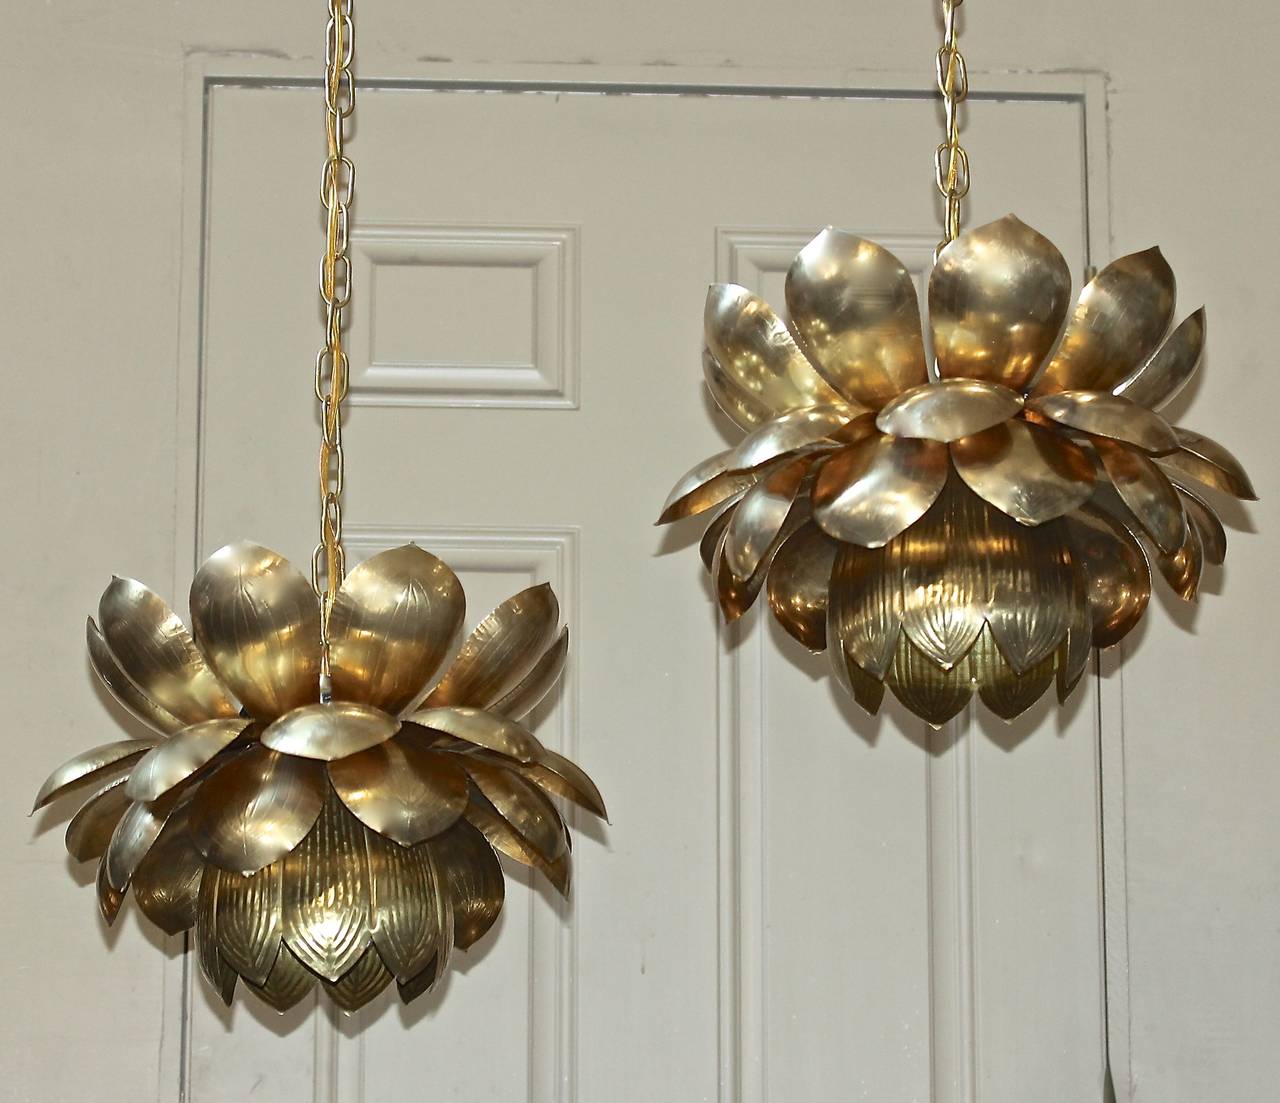 Pair of large brass lotus blossom light pendants or chandeliers made by the Feldman Company, Los Angeles. The lower light uses 1 - 60 watt max 